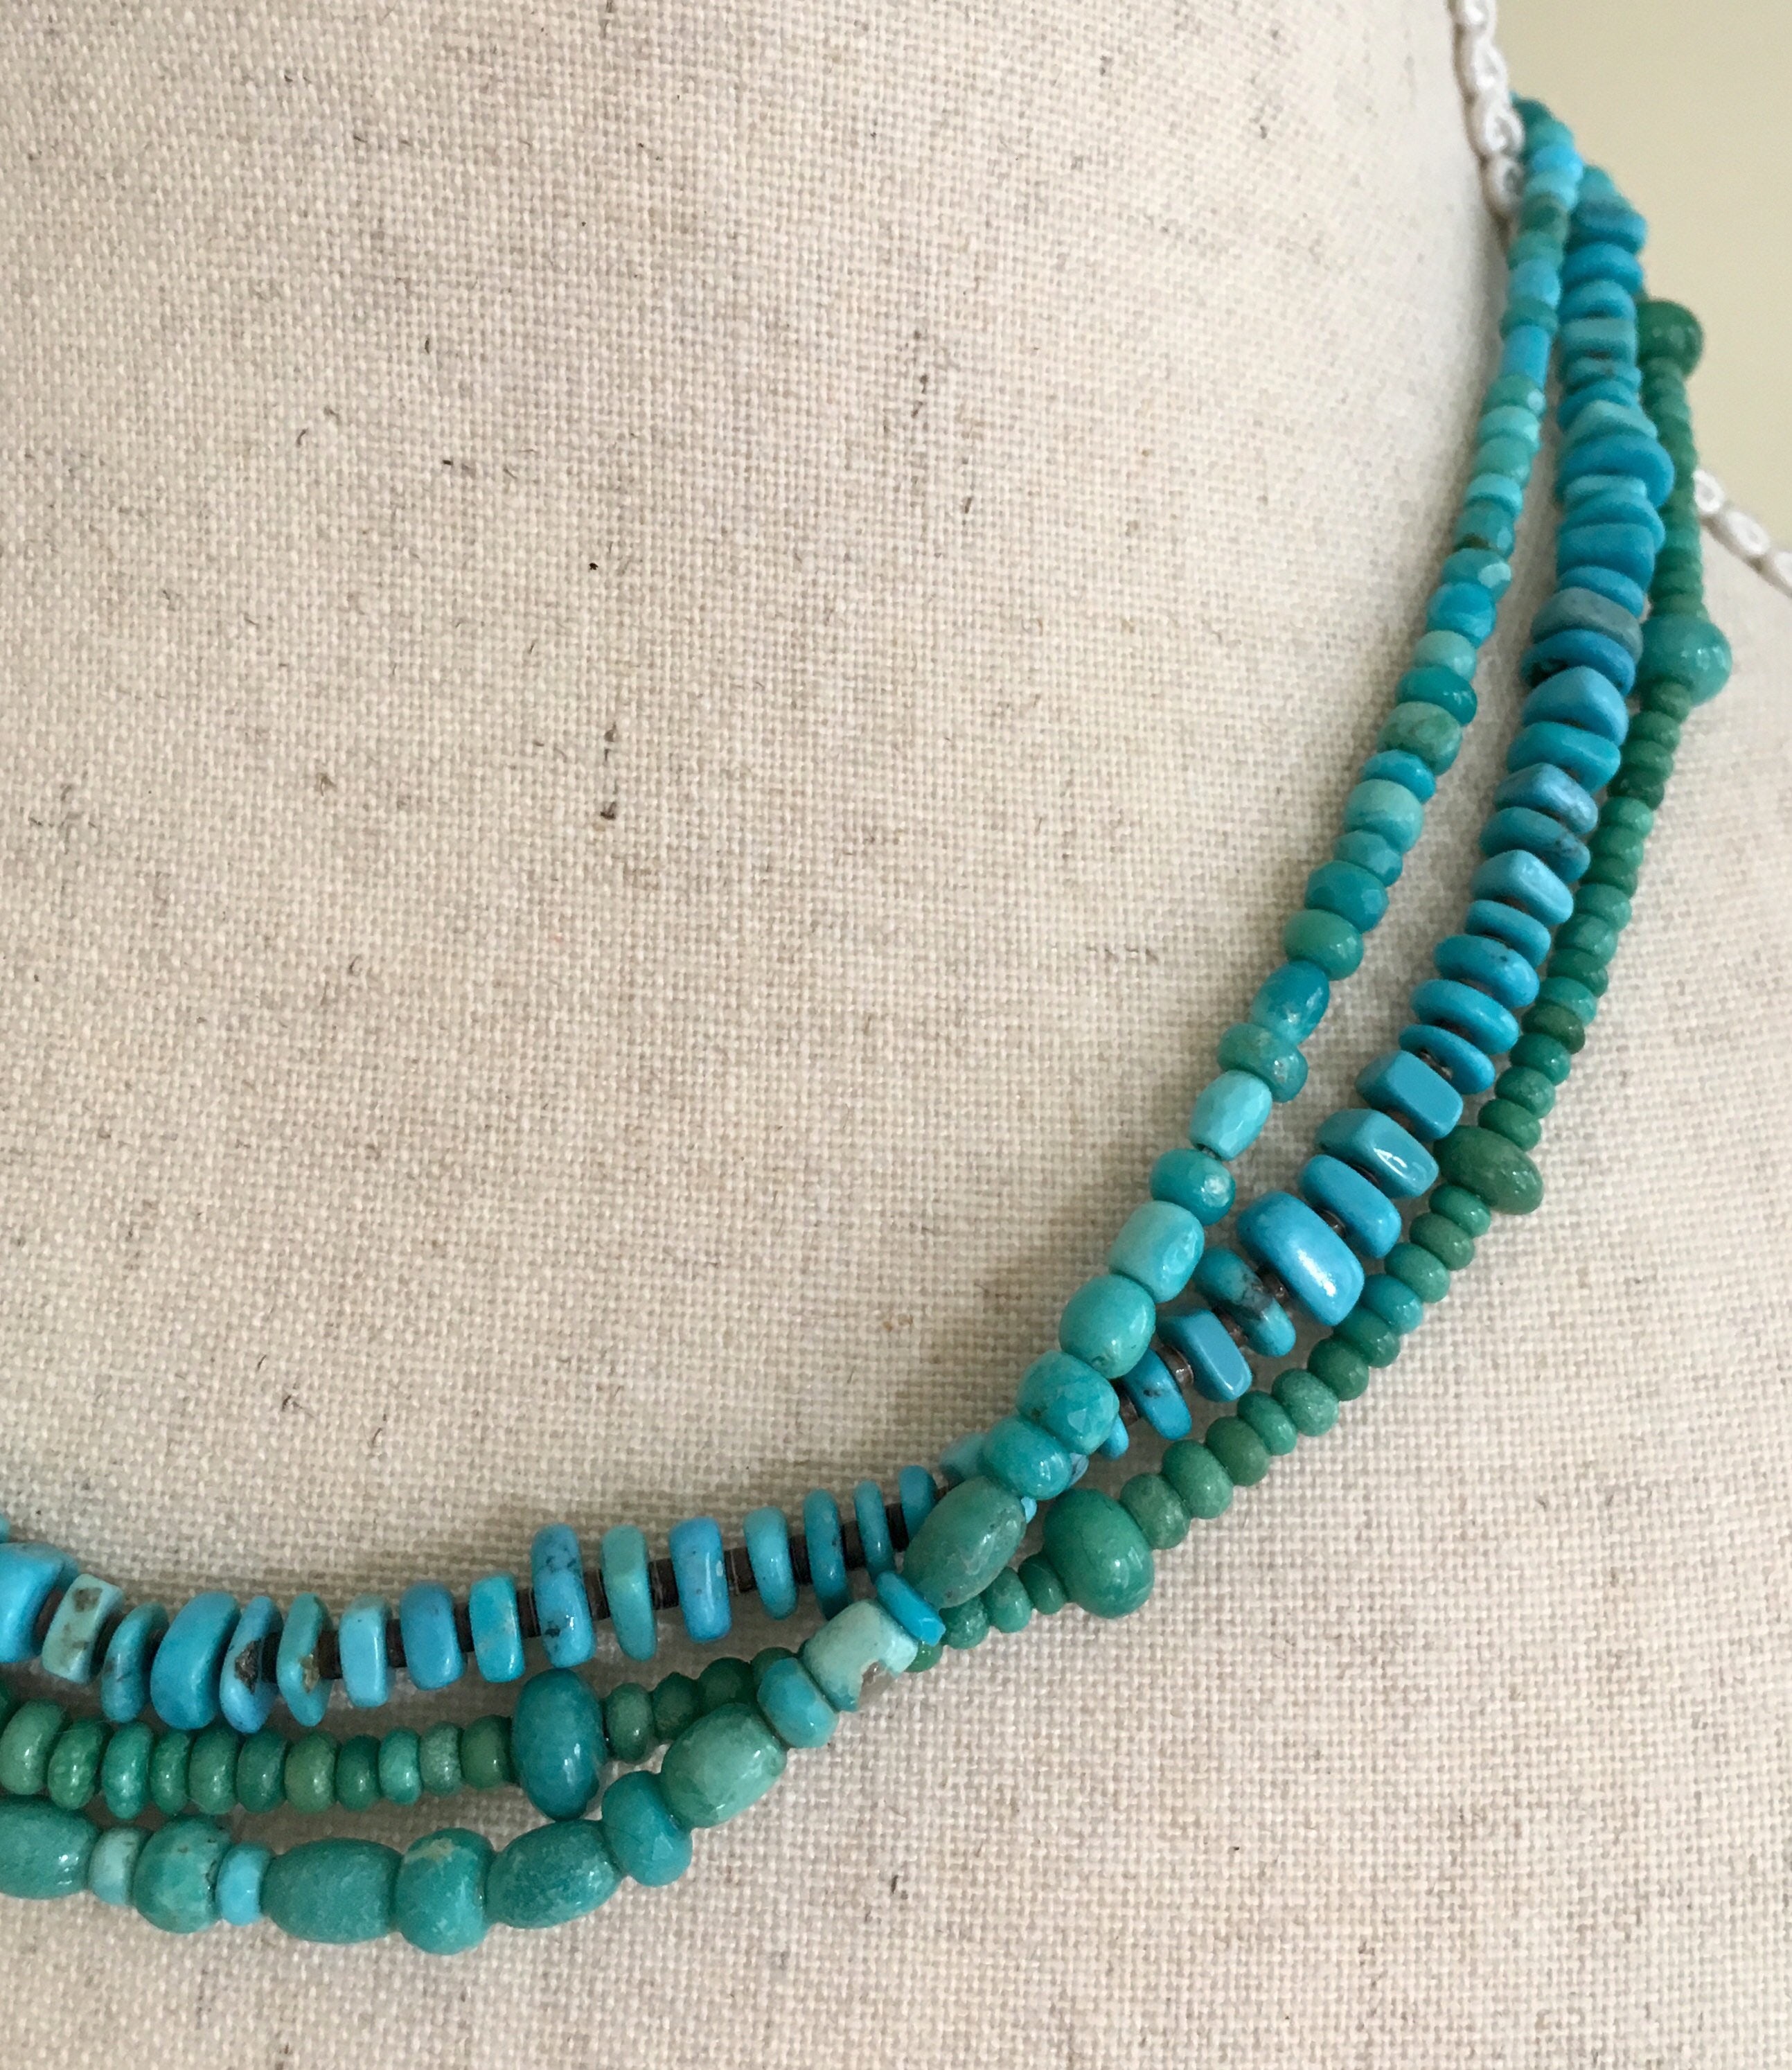 Turquoise Bead Heishi Necklace Native American Sterling Silver Clasp